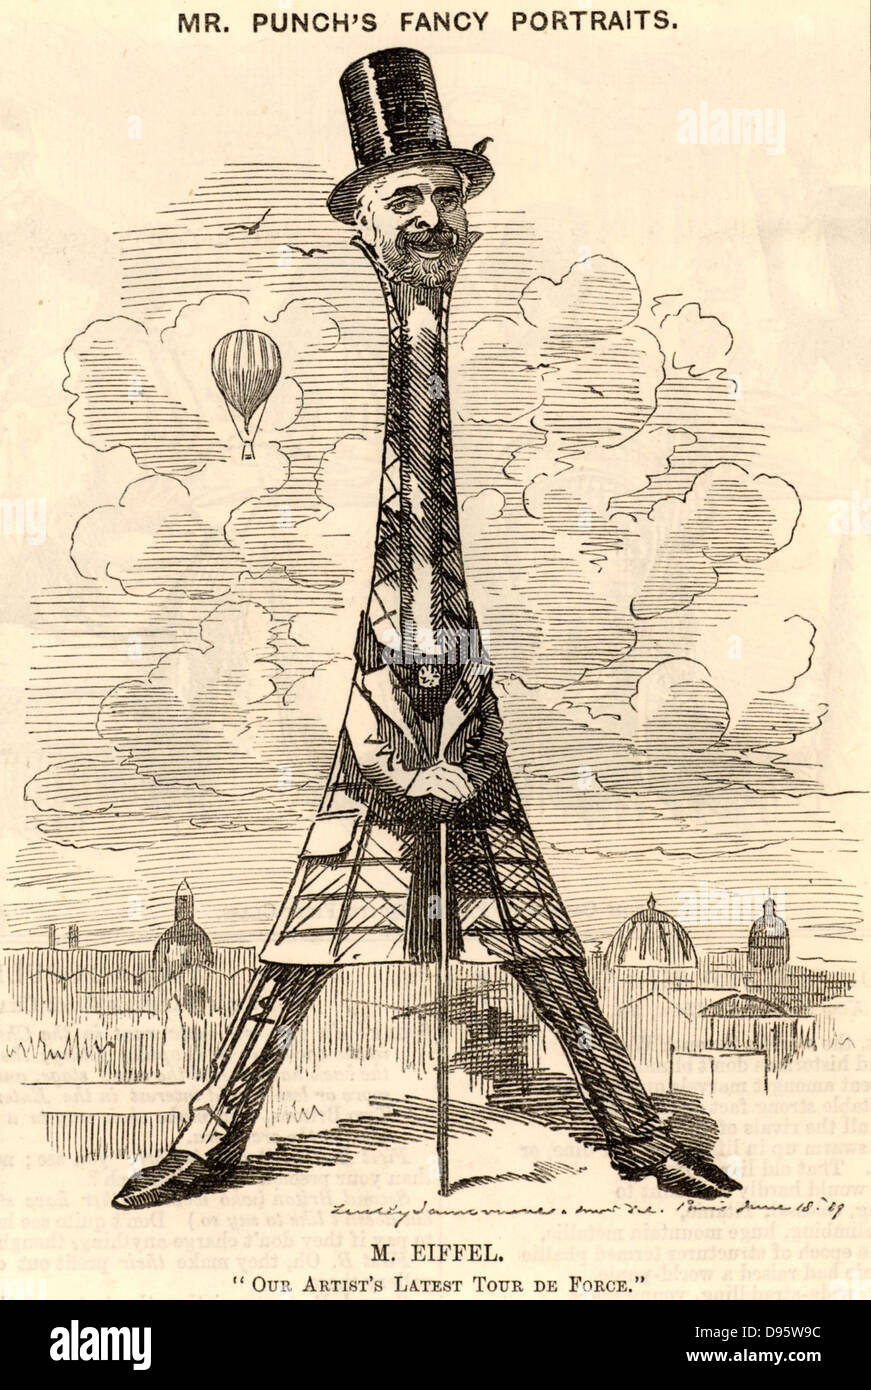 (Alexandre) Gustave Eiffel (1832-1923) French civil engineer.   Cartoon by Edward Linley Sambourne in the Punch's Fancy Portraits series from 'Punch' (London, 29 June 1889) celebrating the building of the Eiffel Tower and the opening of the Exposition Universelle in Paris, France, on 6 May 1889. Stock Photo